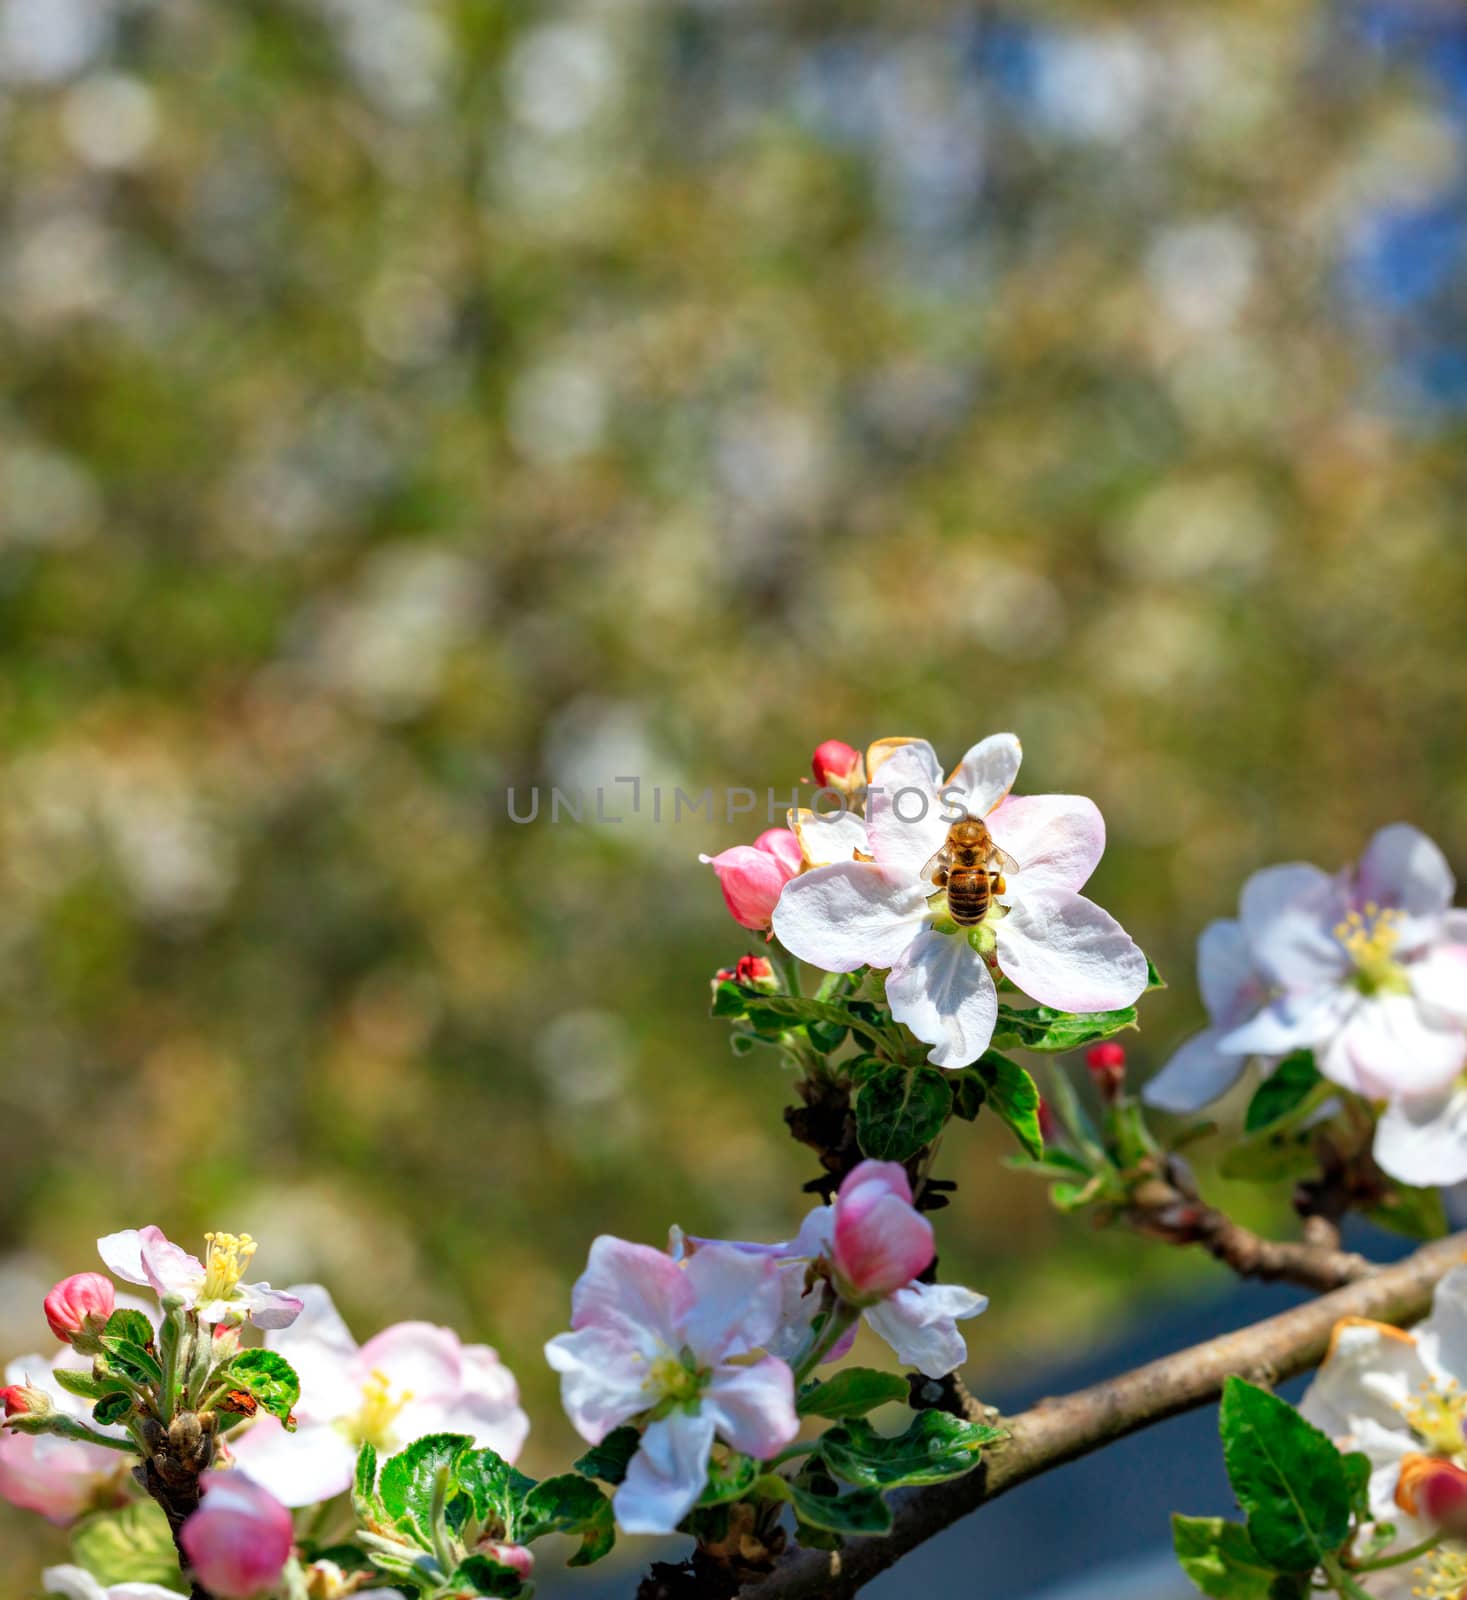 A hardworking bee pollinates a flower of an apple tree and collects nectar and pollen in the sun against a background of a blossoming spring garden in blur, closeup.